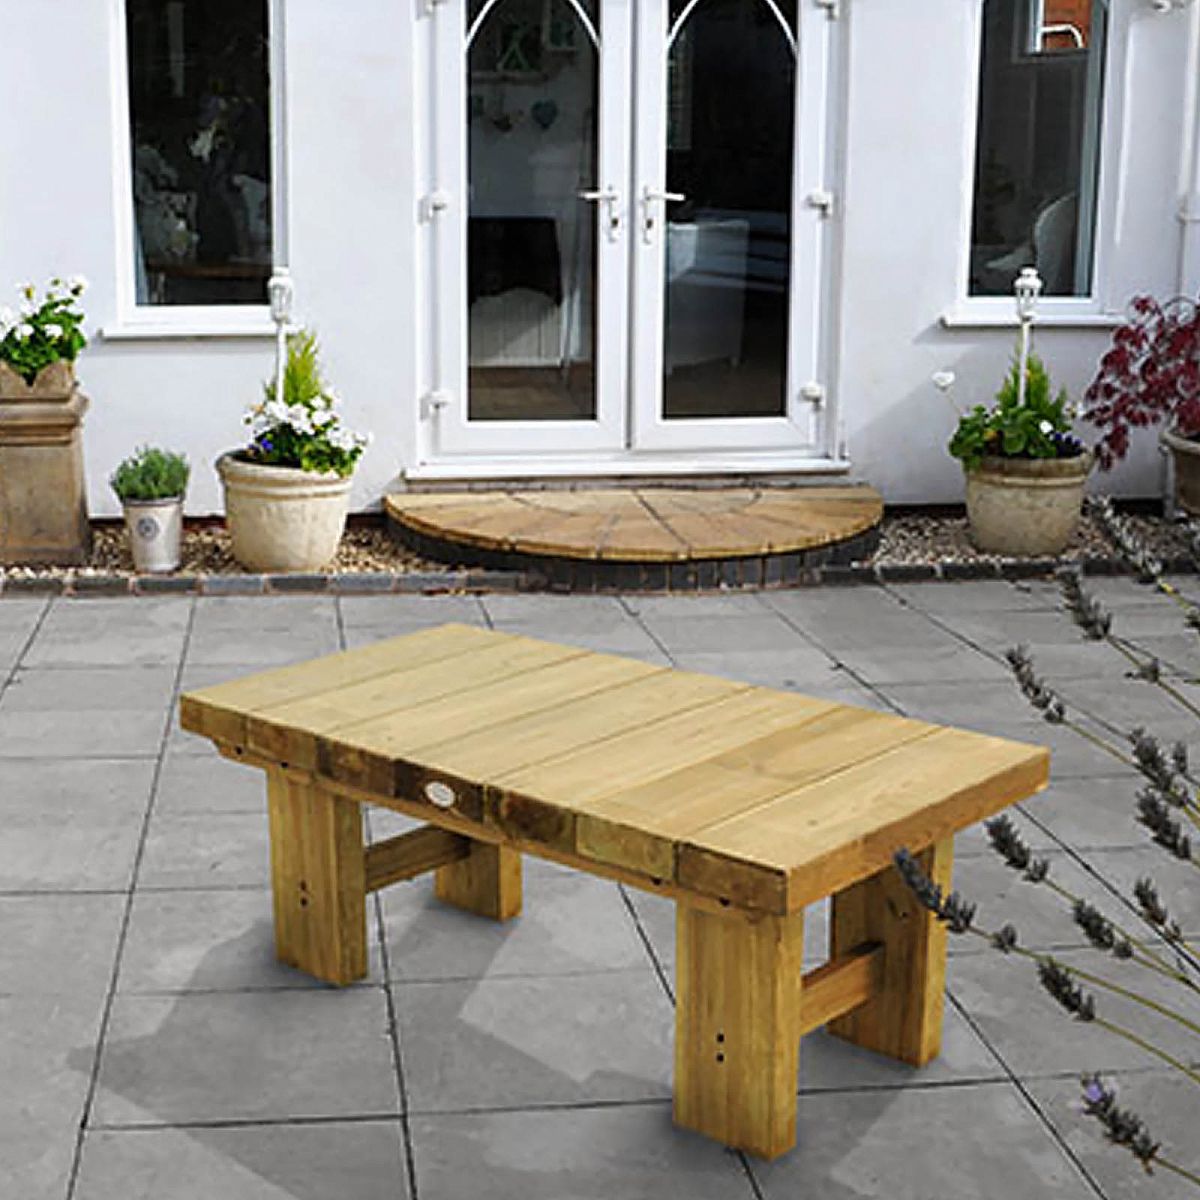 Outdoor Wooden Low Level Sleeper Table by Forest Garden